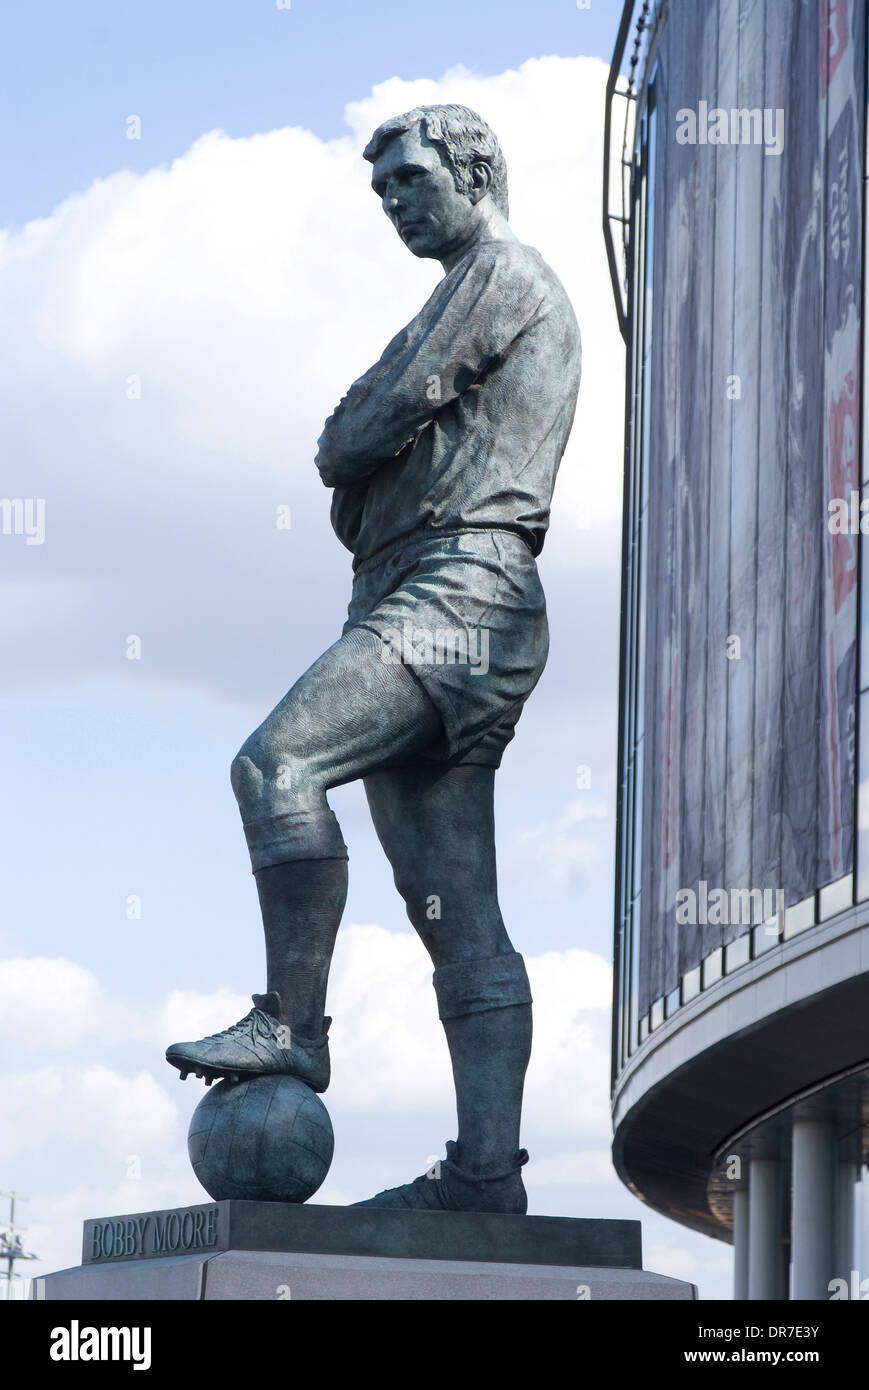 Bobby Moore, Wembley Stadium, Wembley, Londres, Angleterre, SW10 Banque D'Images